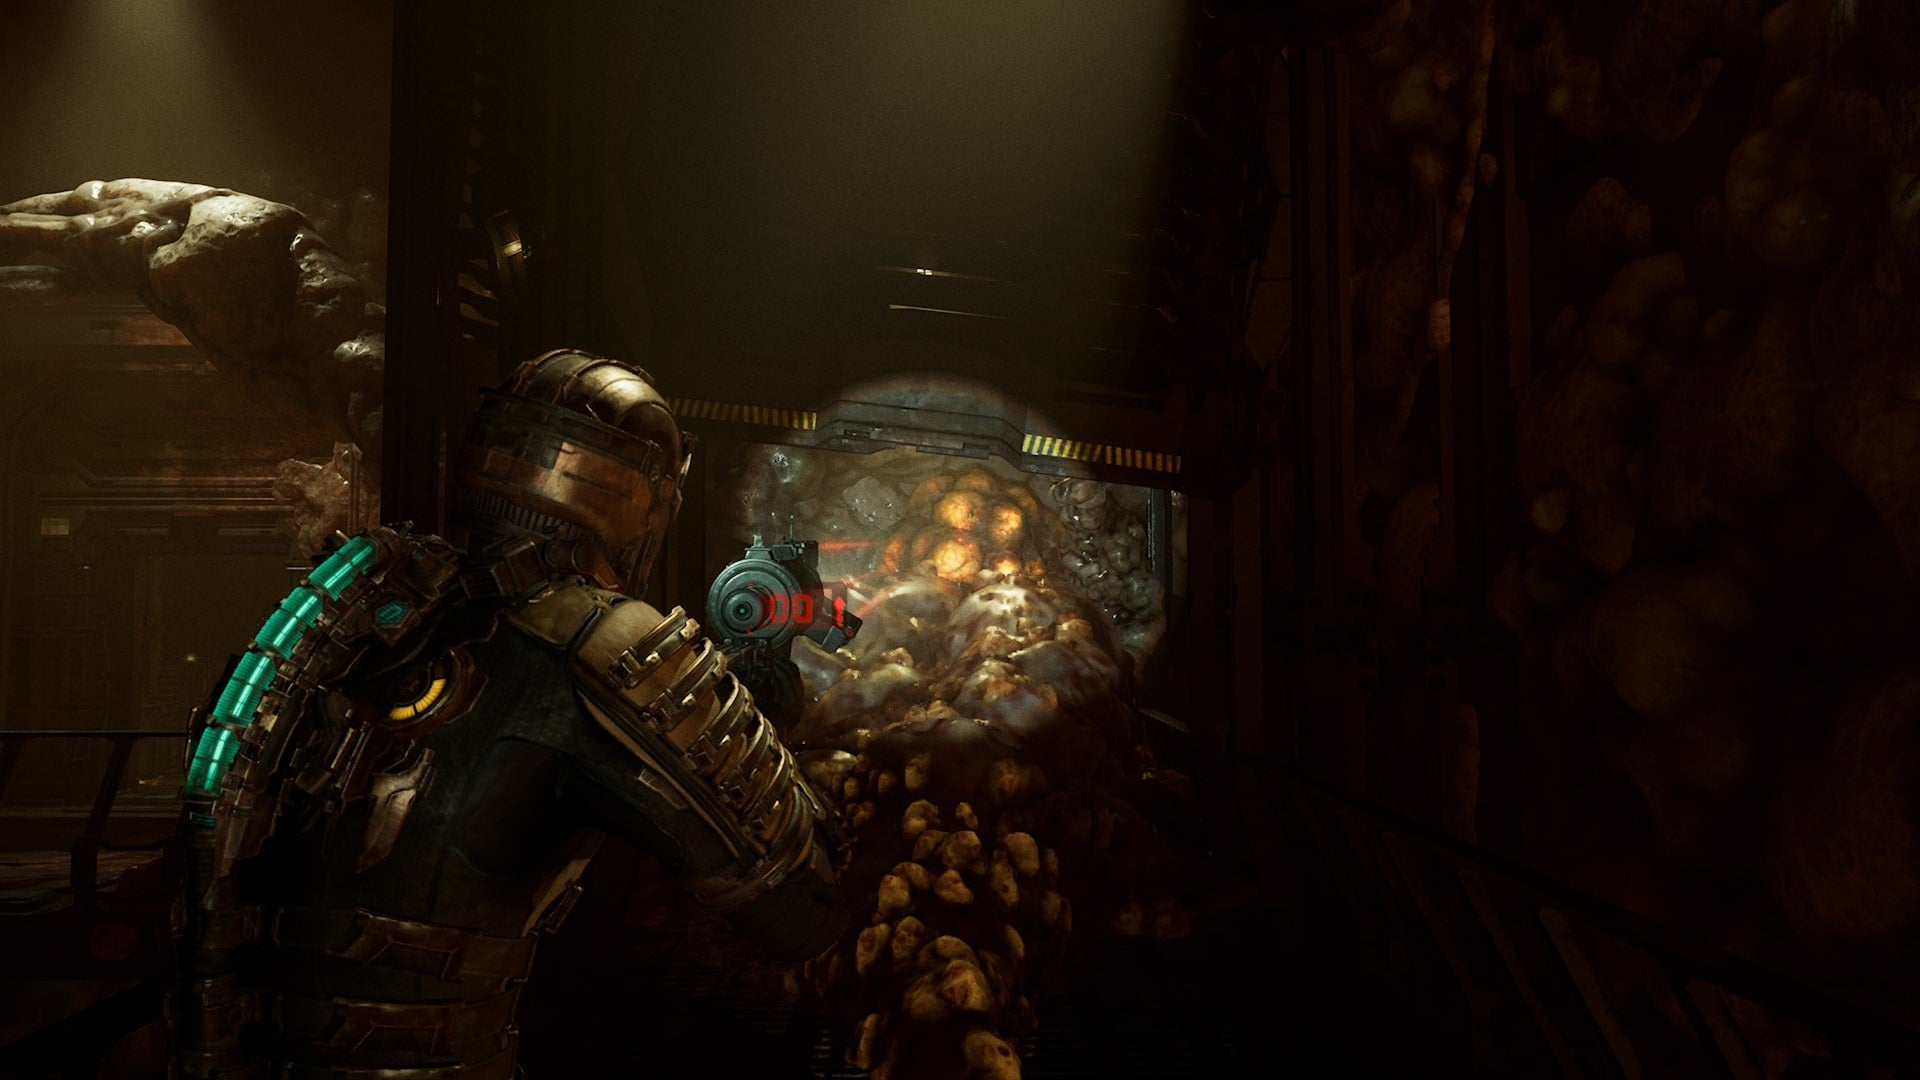 Isaac faces a corrosive bulb in Dead Space